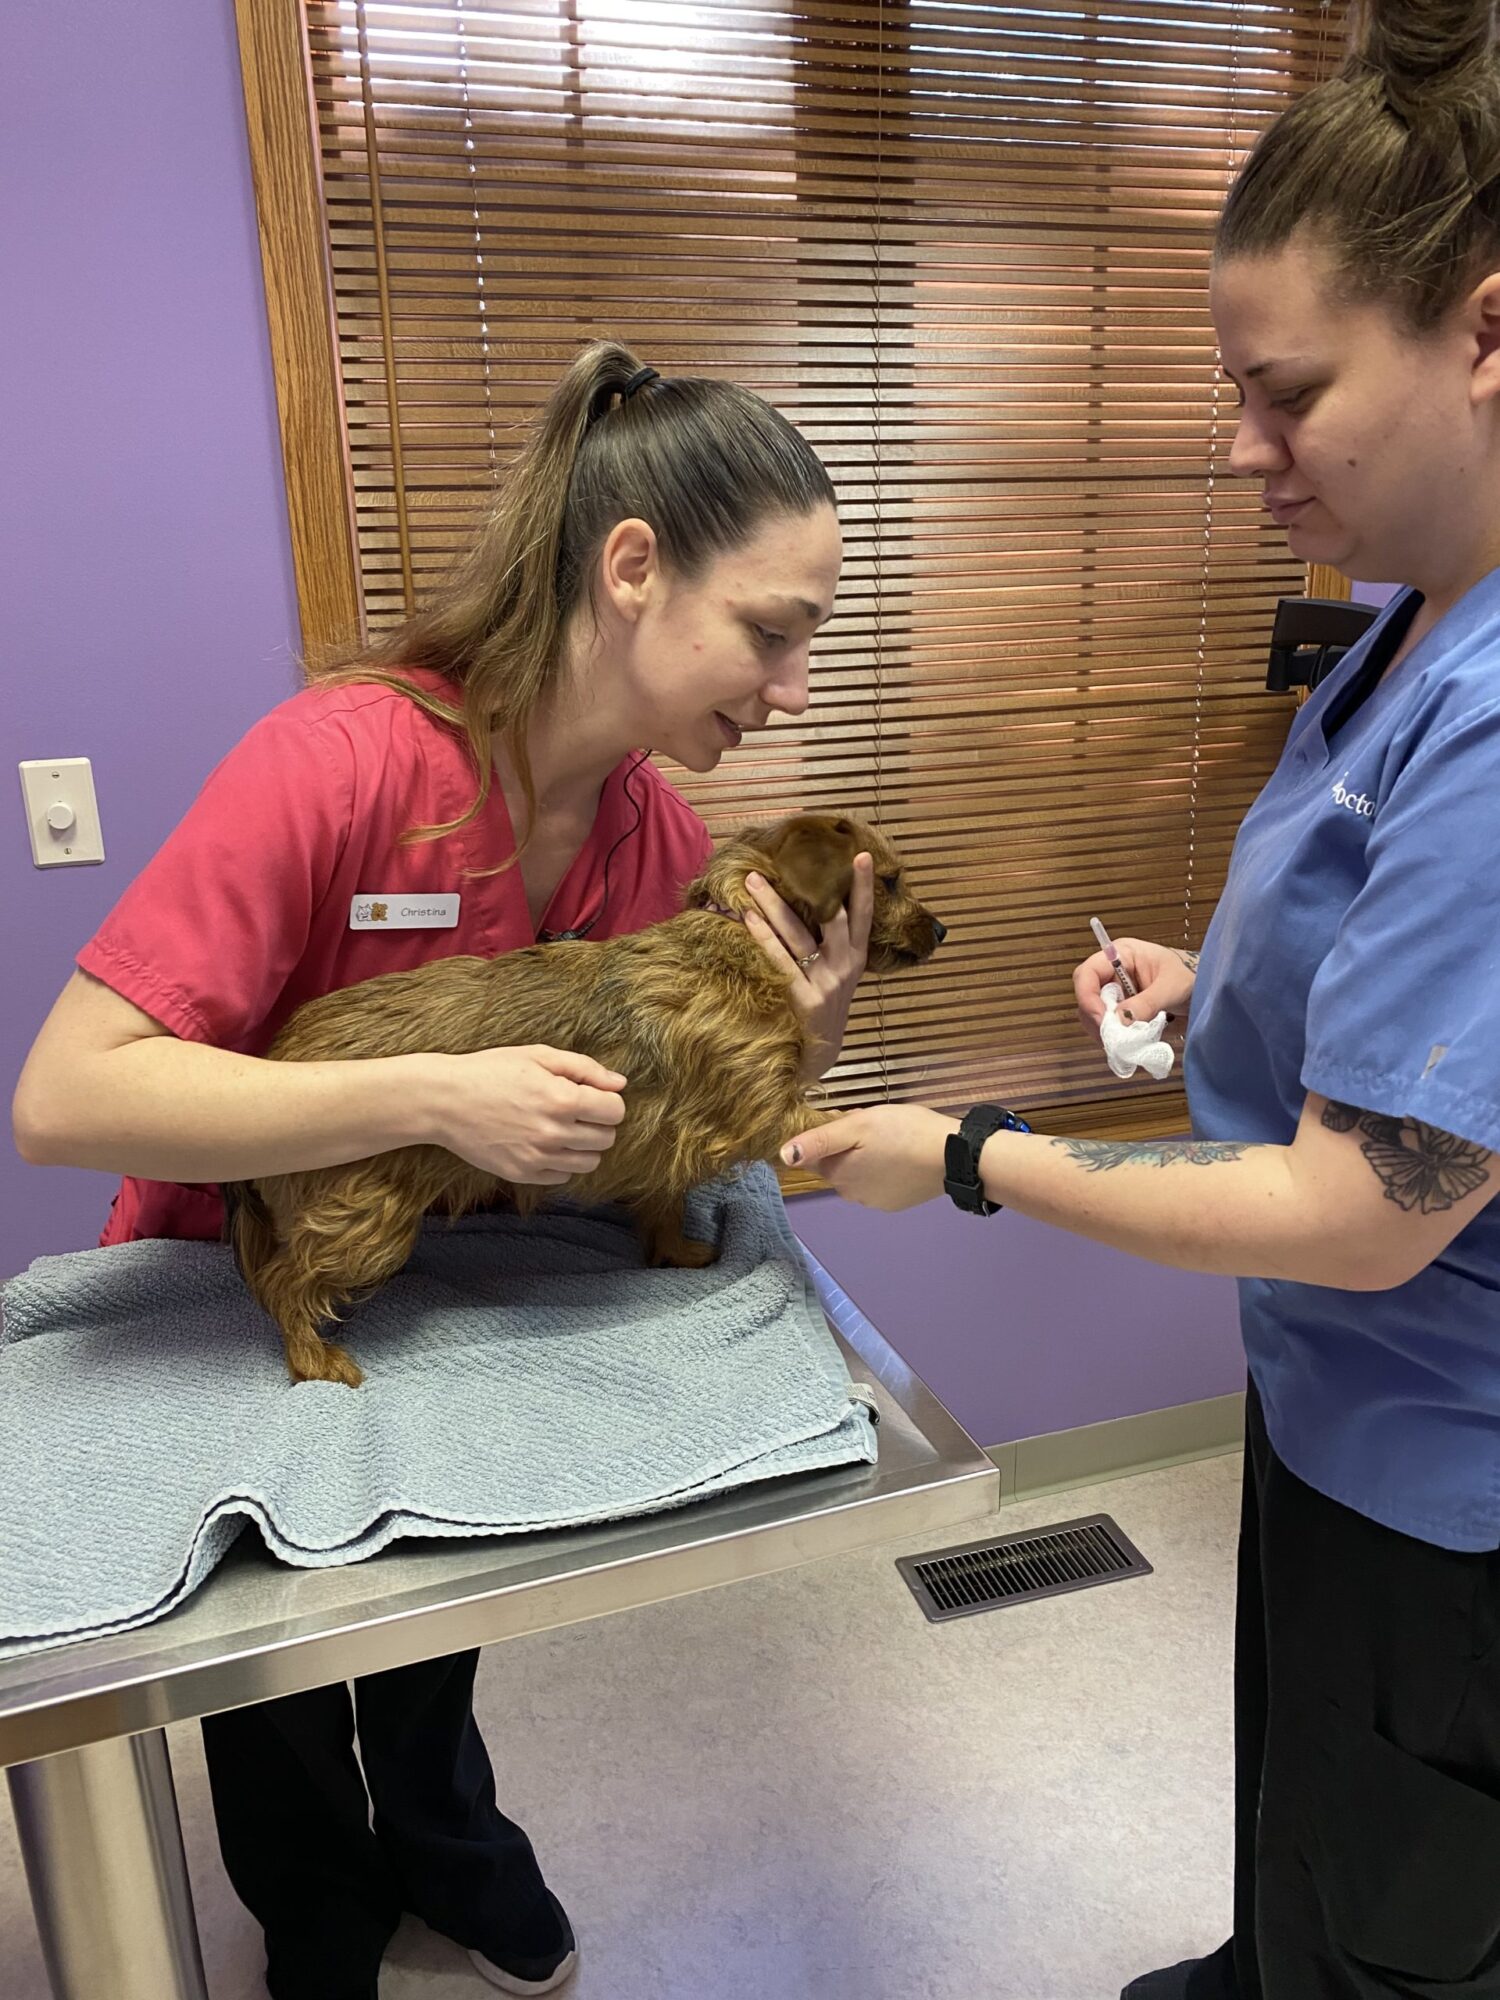 While optional, our staff encourages you to do Heartworm and Tick Disease Testing, which requires pulling blood to check for intestinal parasites.